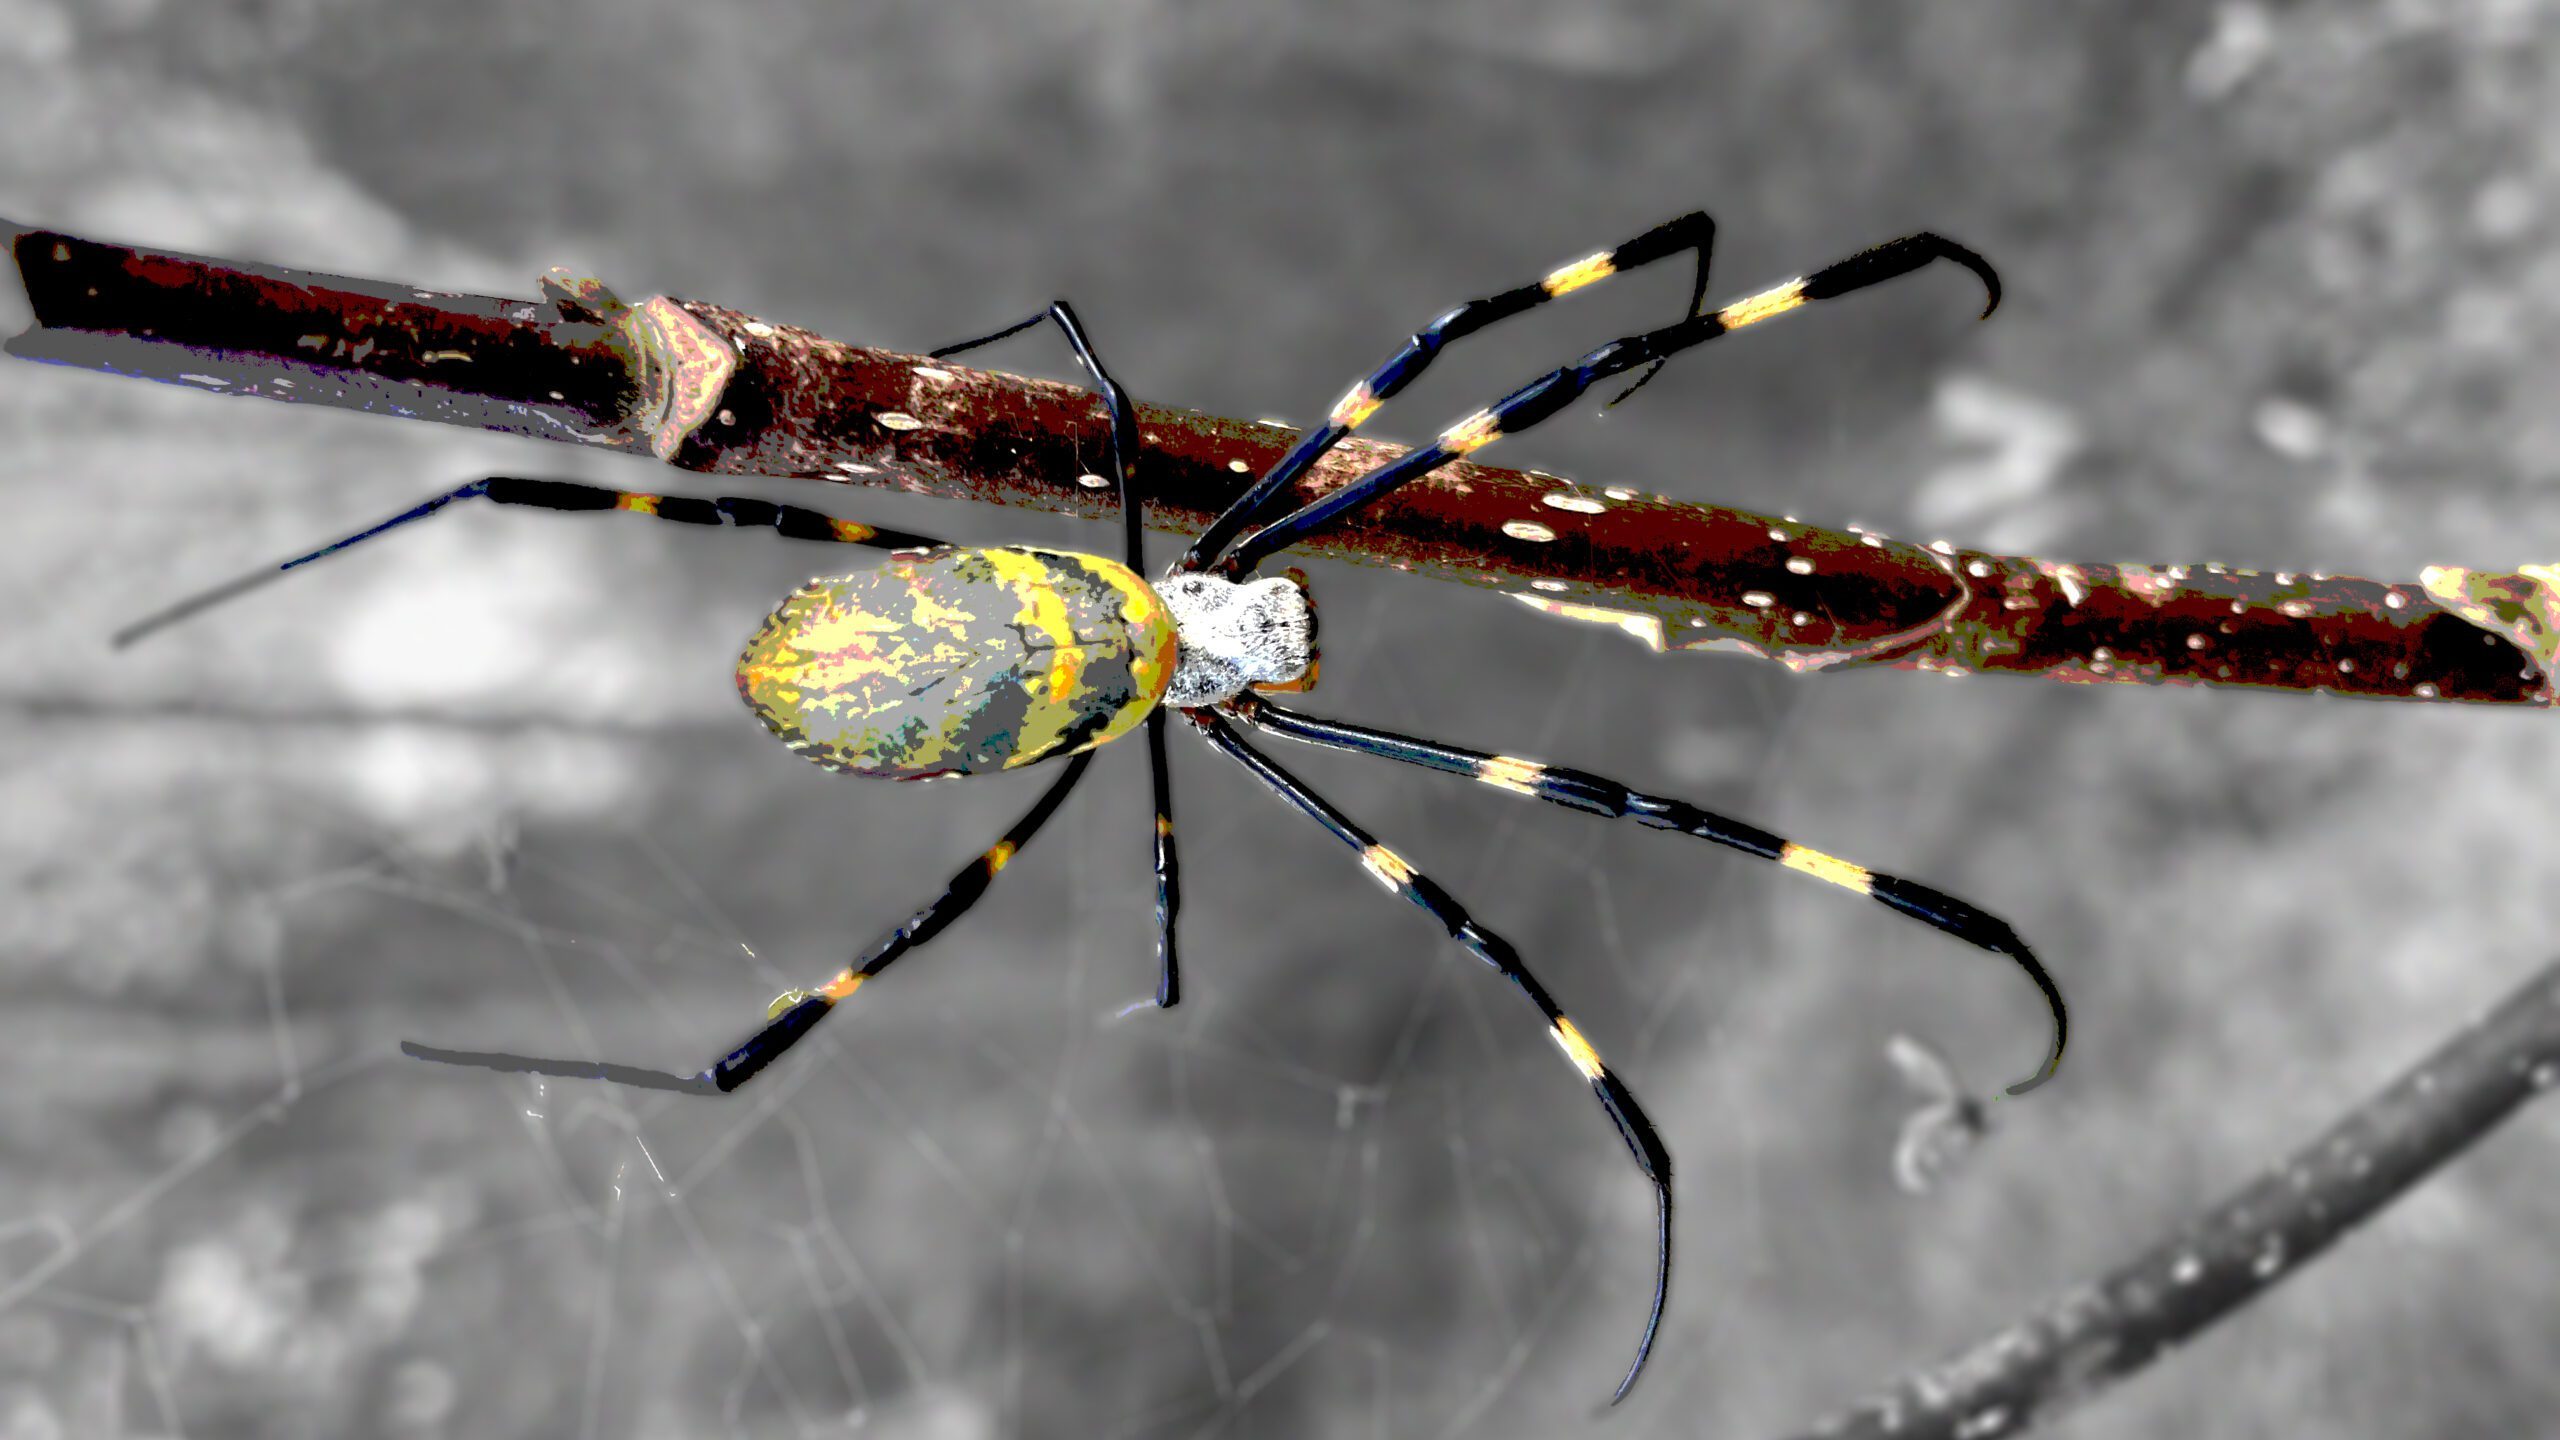 The Joro spider is shown. (Provided by Clemson University)